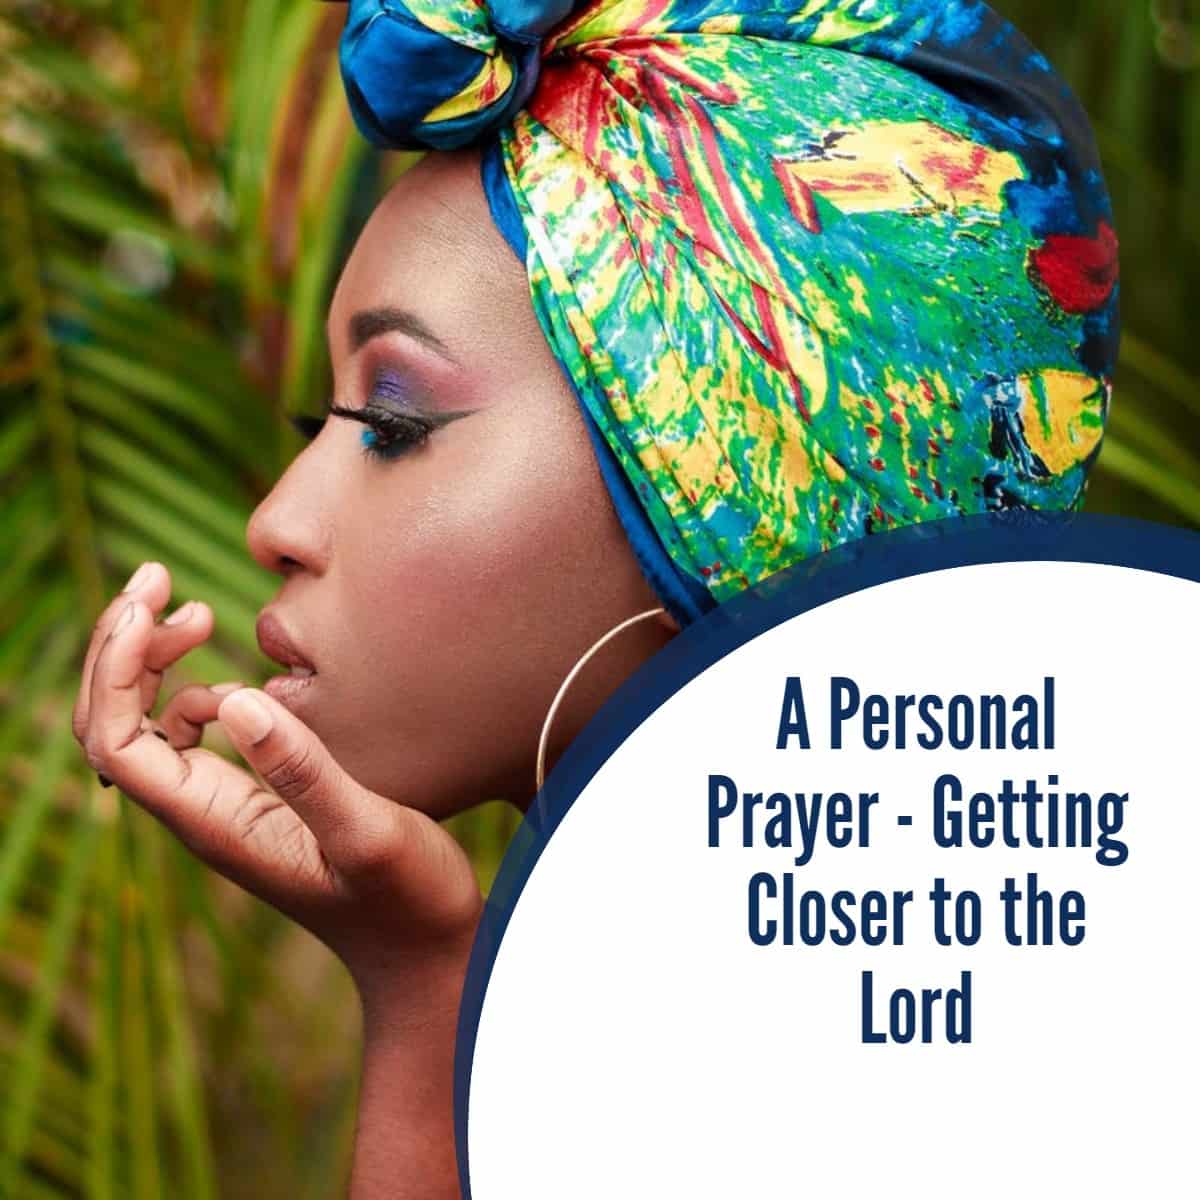 A Personal Prayer - Getting closer to the Lord